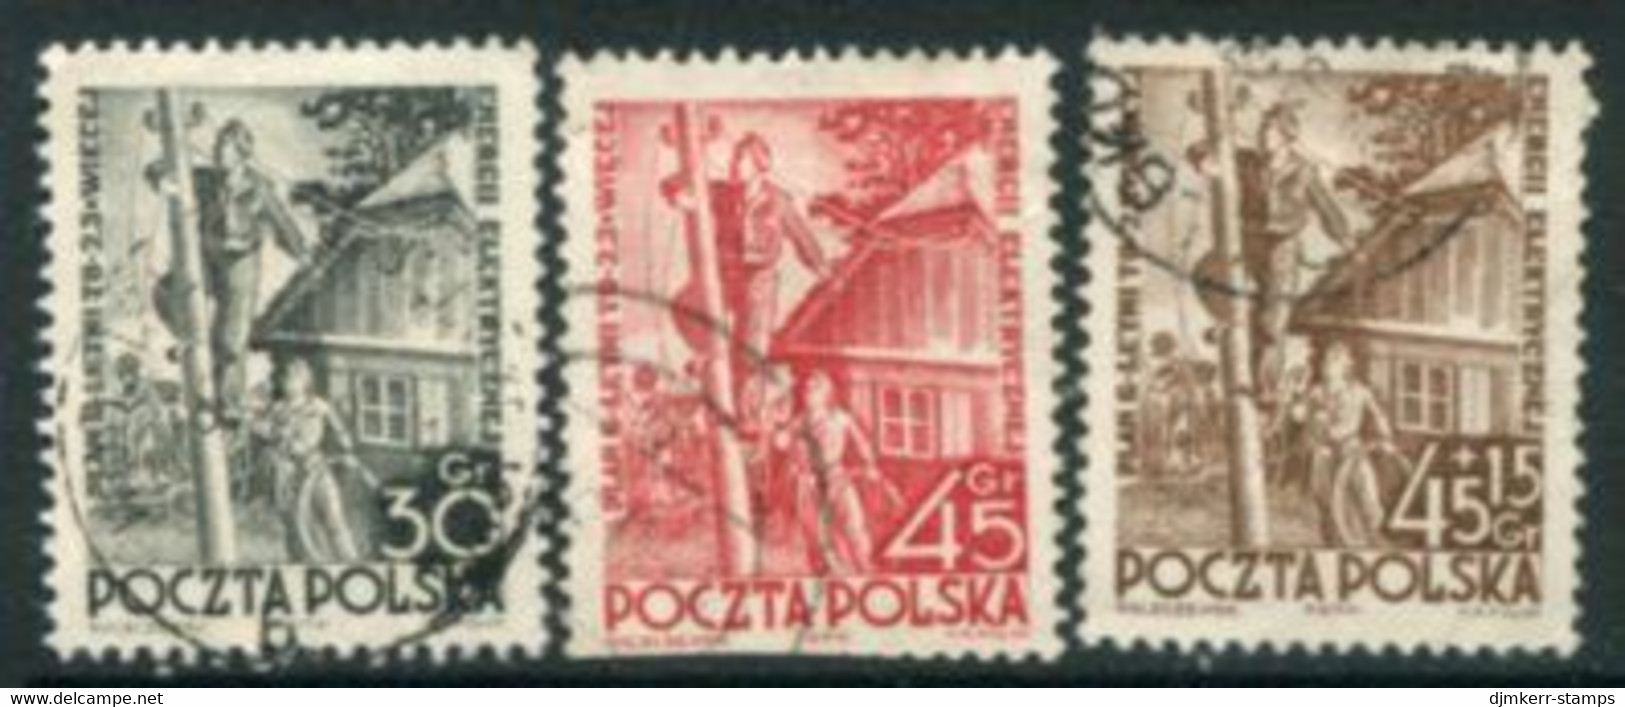 POLAND 1951 Electrical Industries Used.  Michel 719-20, 747 - Used Stamps